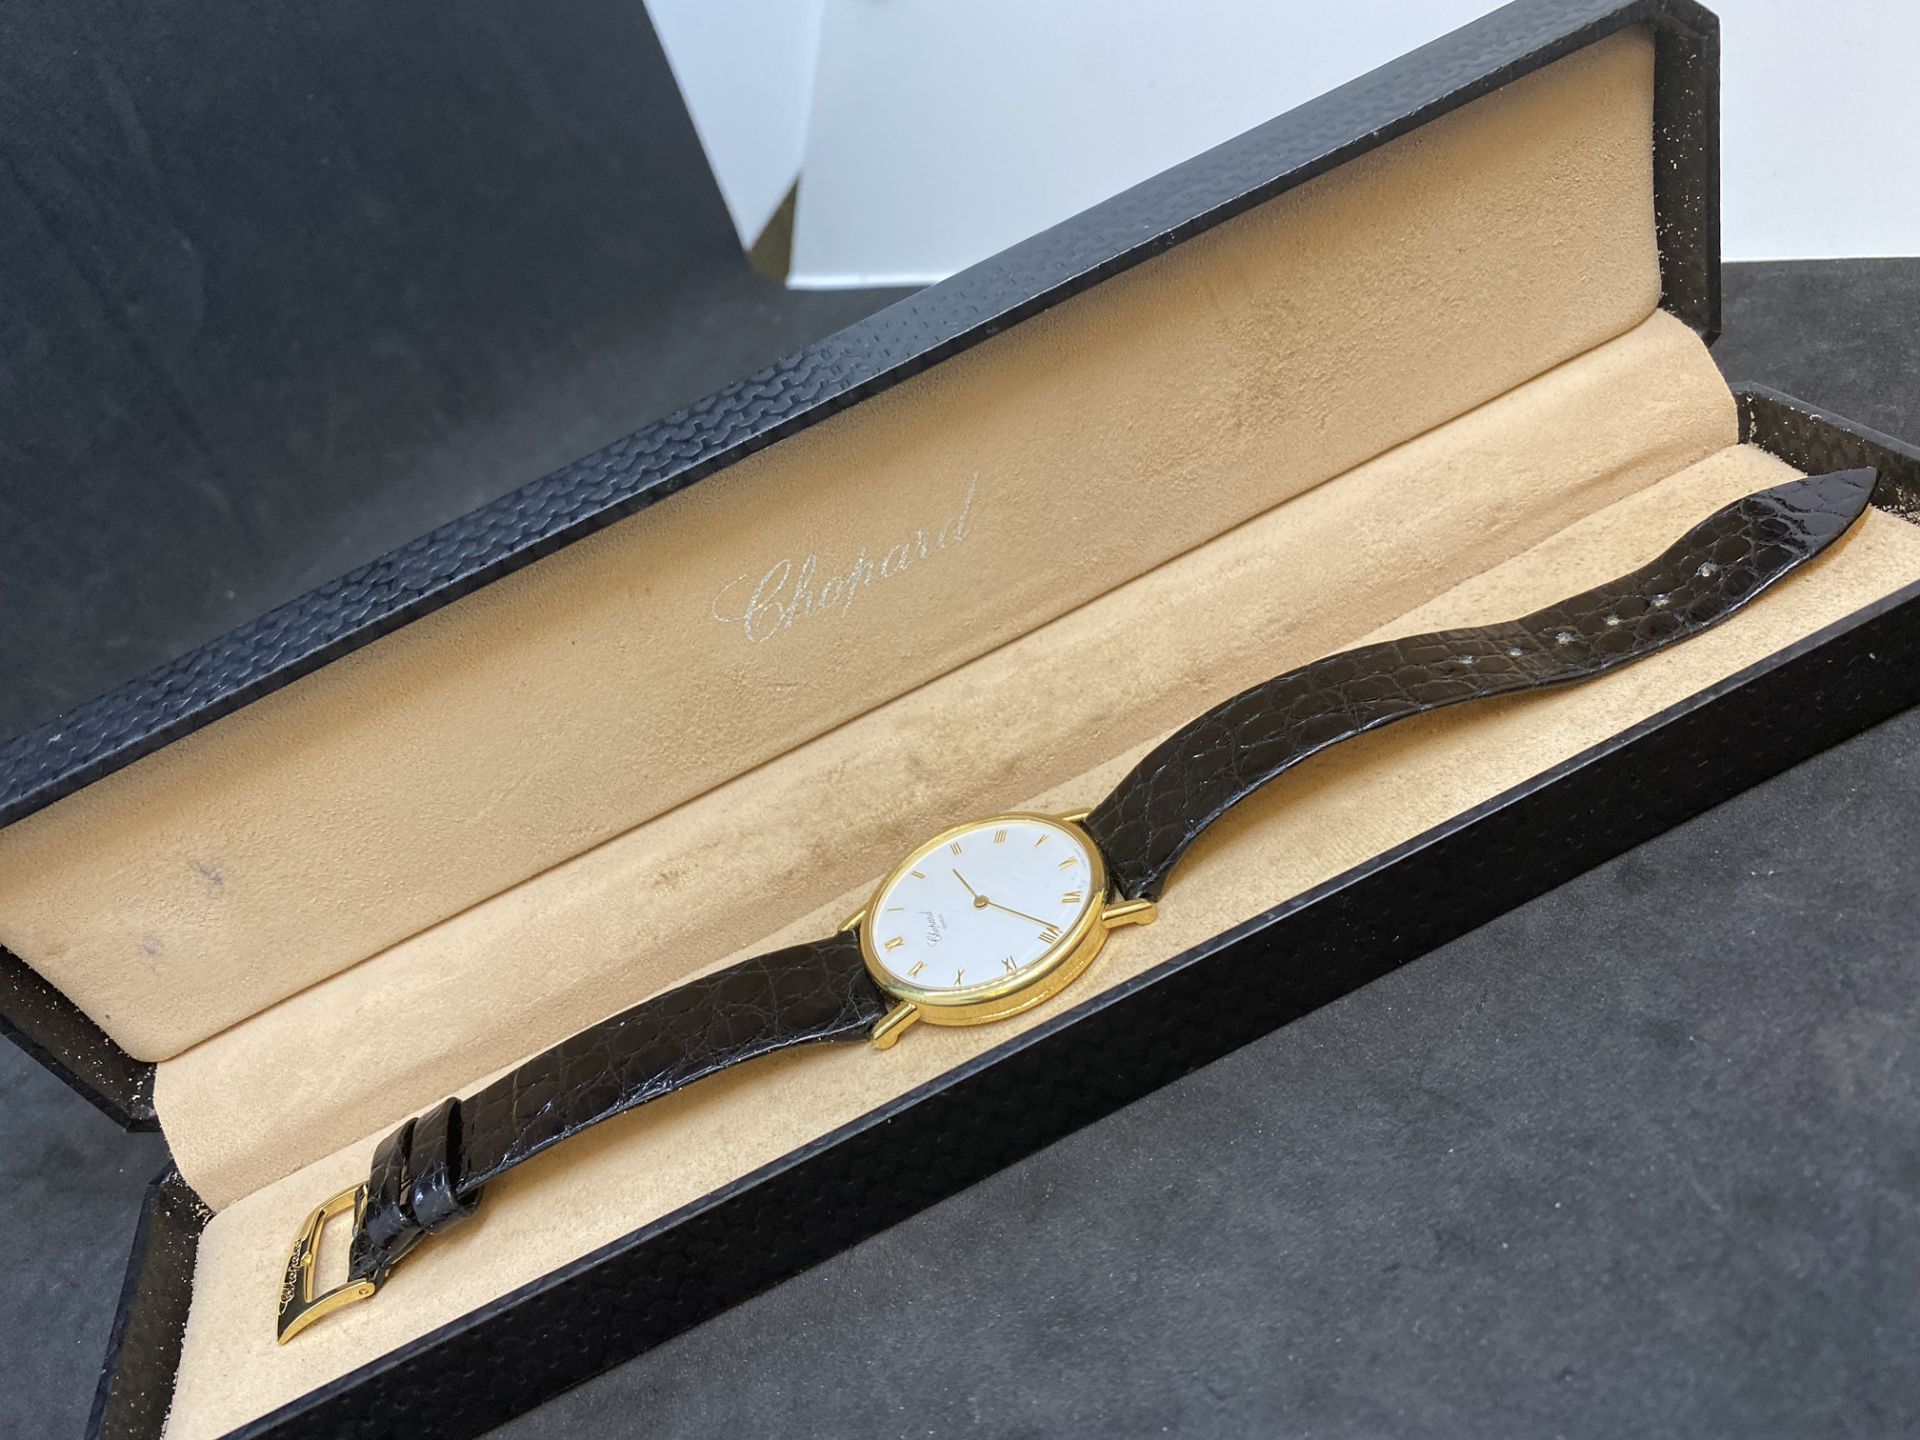 18ct GOLD CHOPARD WATCH WITH CHOPARD WATCH BOX - Image 4 of 13